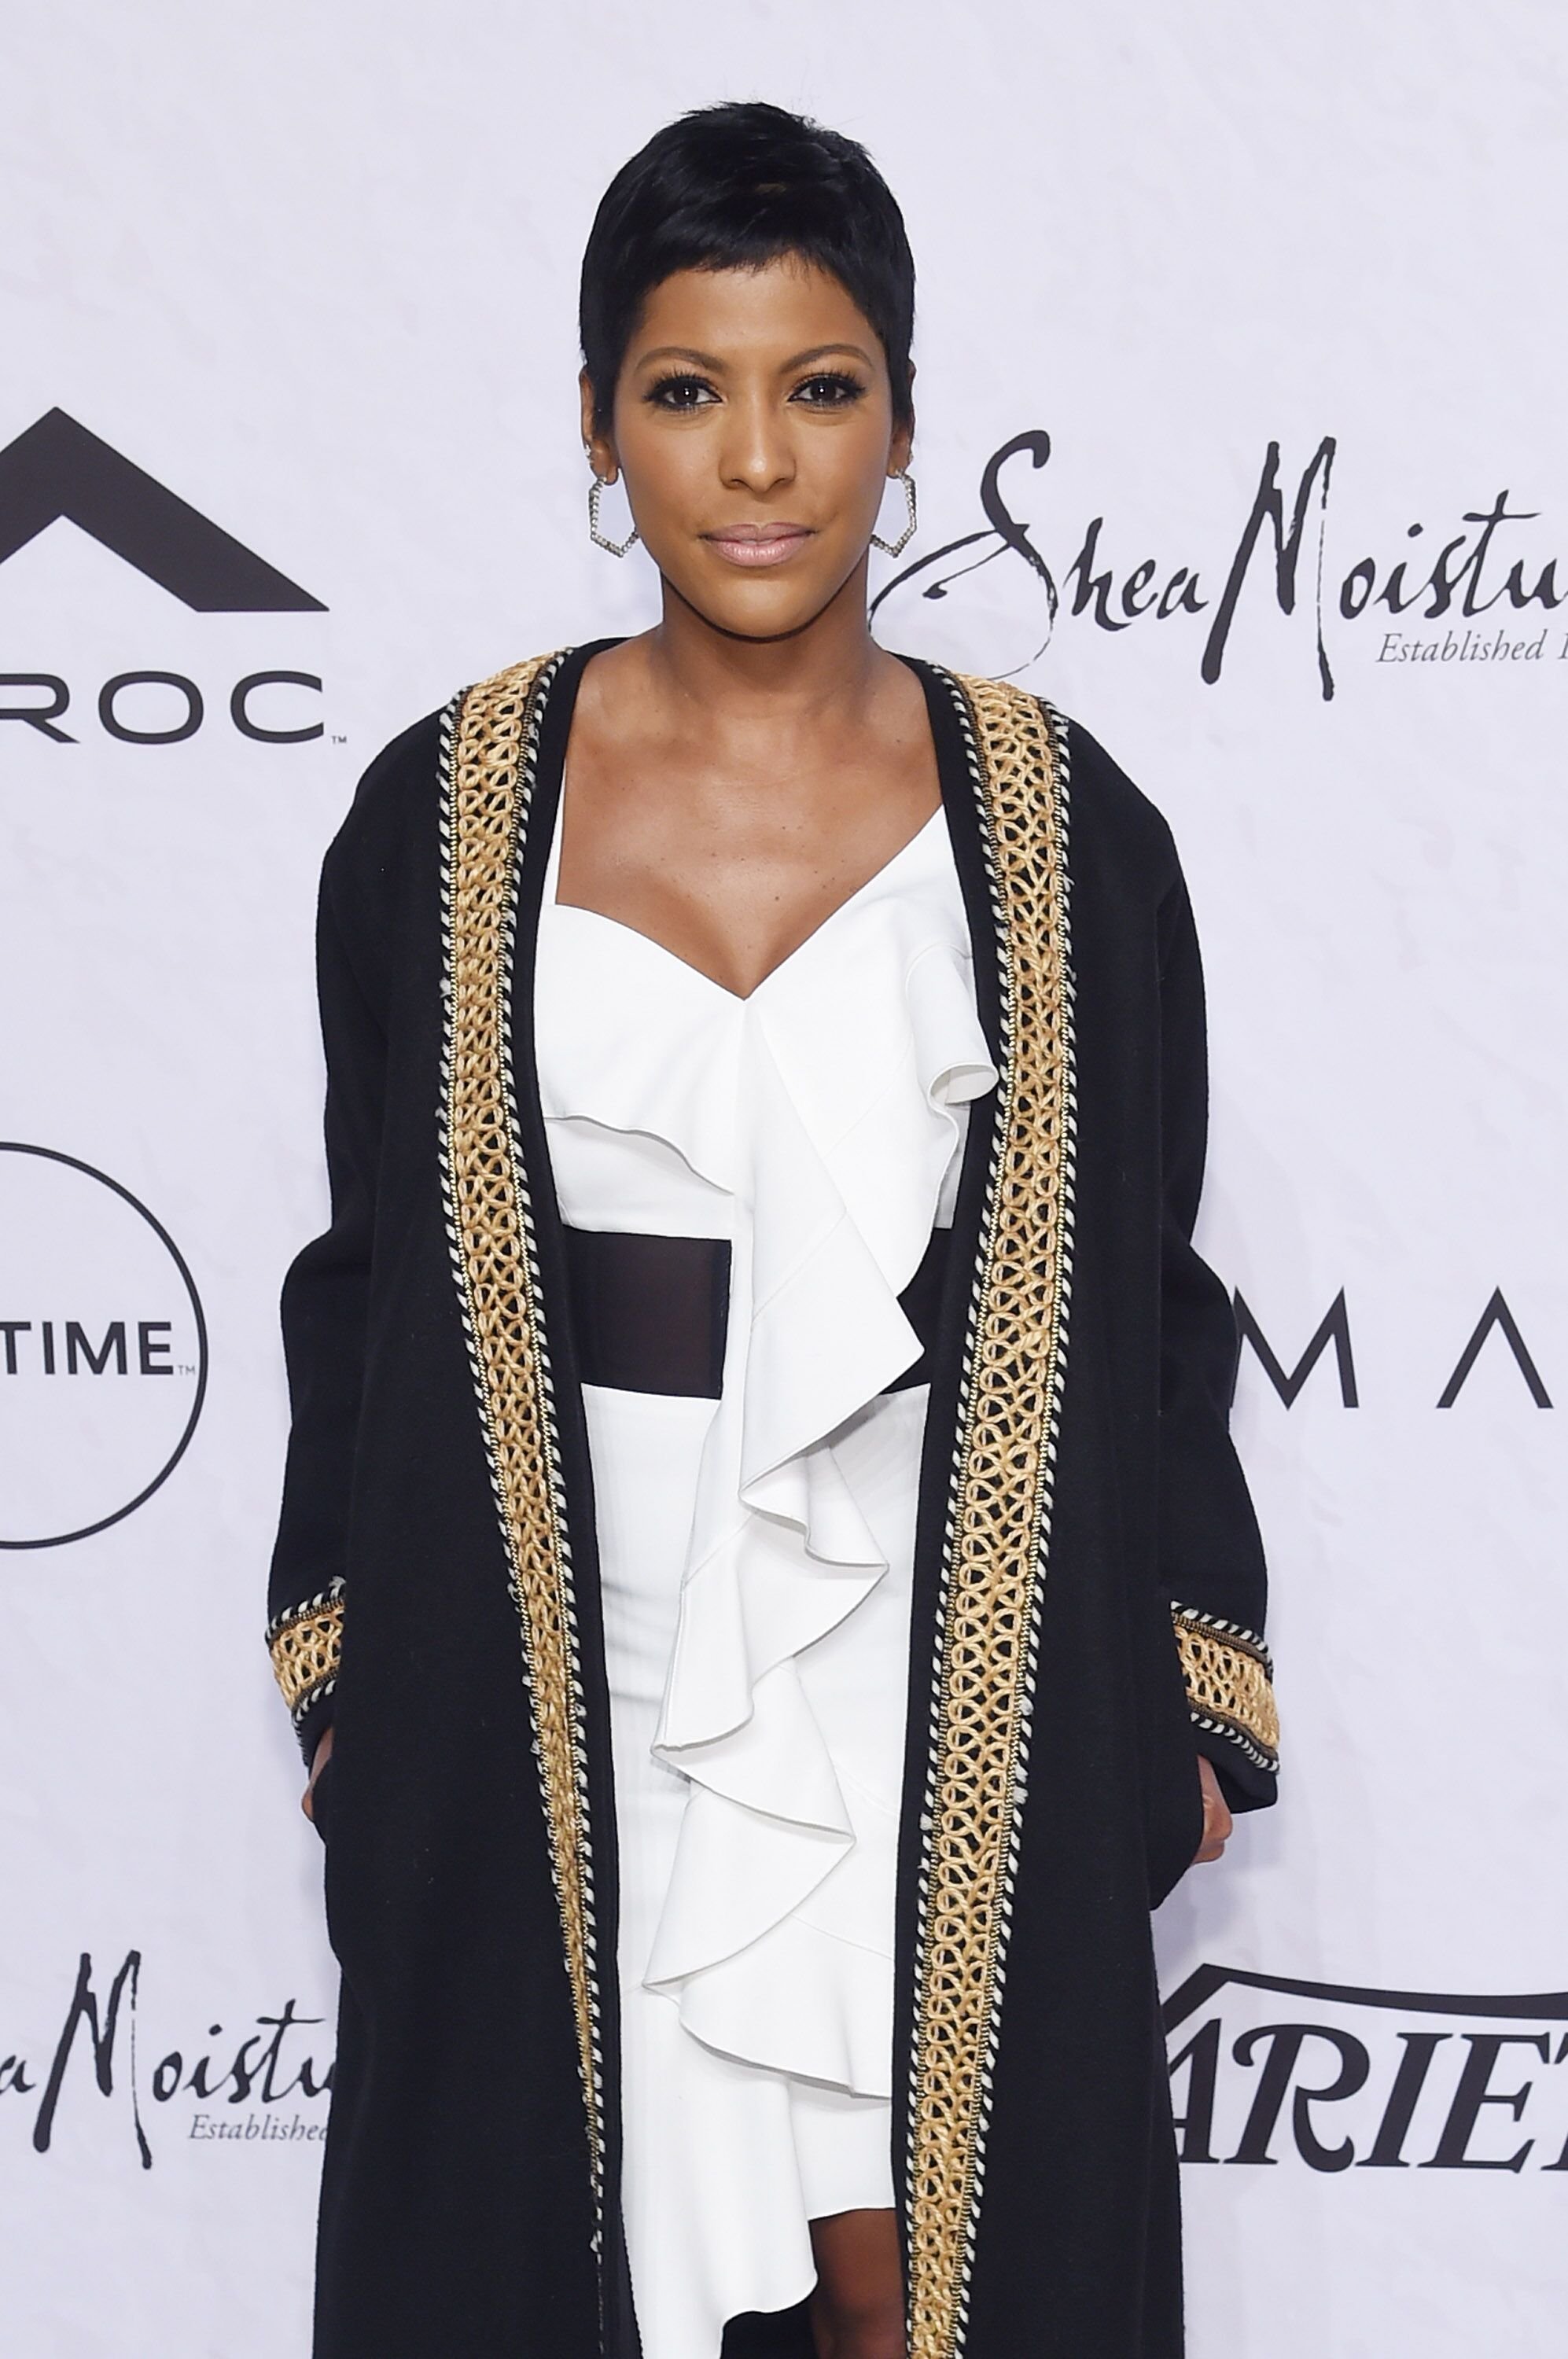 TV show host Tamron Hall attends Variety's "Power of Women: New York" event at Cipriani Wall Street in April 2018. | Photo: Getty Images